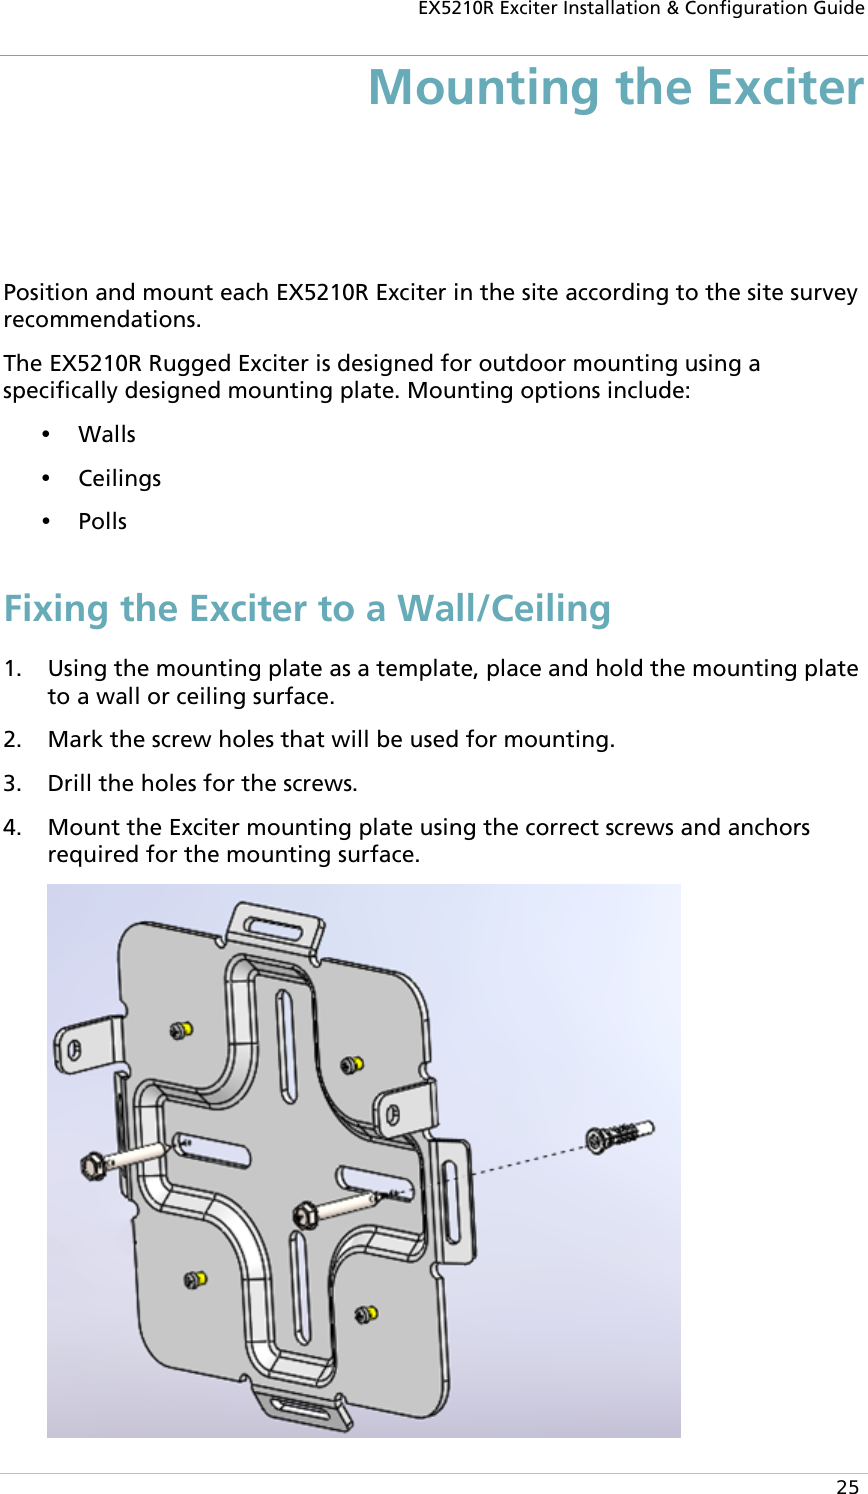 EX5210R Exciter Installation &amp; Configuration Guide  25 Mounting the Exciter  Position and mount each EX5210R Exciter in the site according to the site survey recommendations. The EX5210R Rugged Exciter is designed for outdoor mounting using a specifically designed mounting plate. Mounting options include:  Walls  Ceilings  Polls Fixing the Exciter to a Wall/Ceiling 1. Using the mounting plate as a template, place and hold the mounting plate to a wall or ceiling surface. 2. Mark the screw holes that will be used for mounting.  3. Drill the holes for the screws. 4. Mount the Exciter mounting plate using the correct screws and anchors required for the mounting surface.  